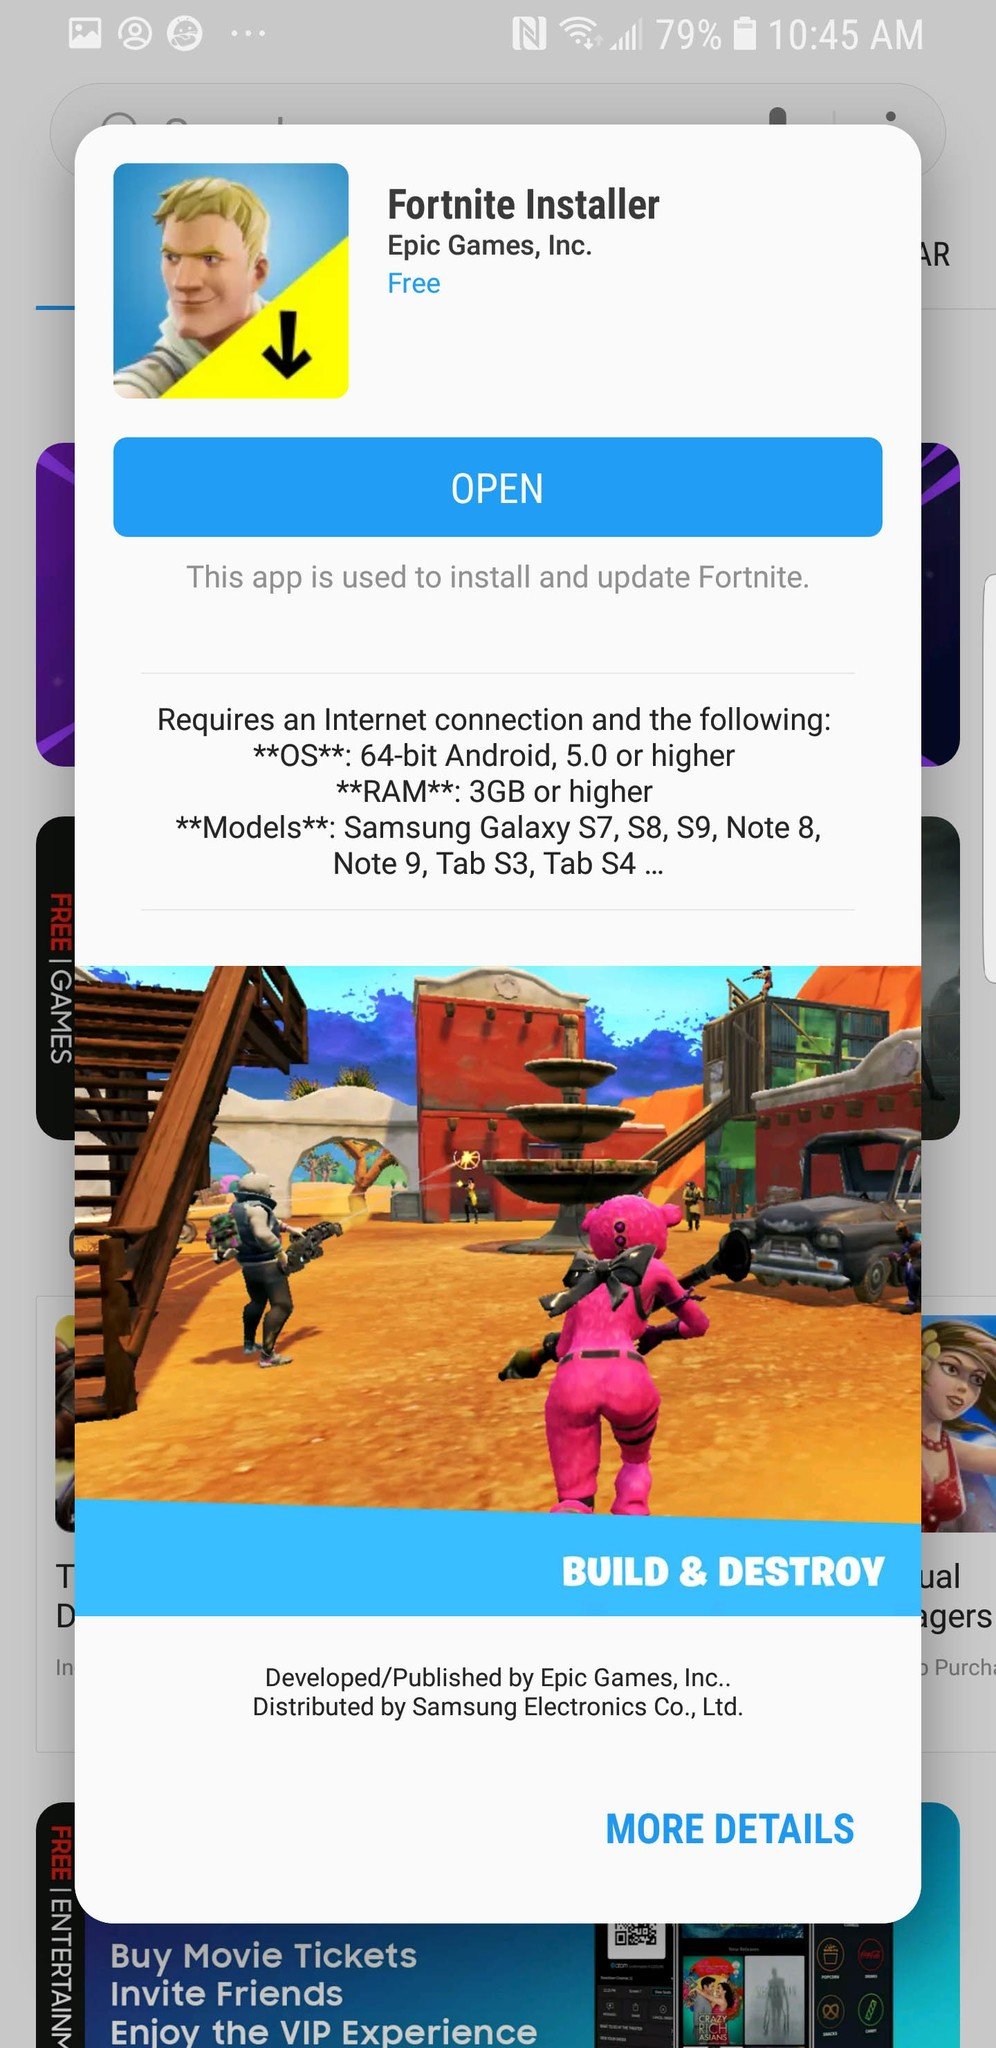 tap to launch the galaxy app store - fortnite installer epic games pc